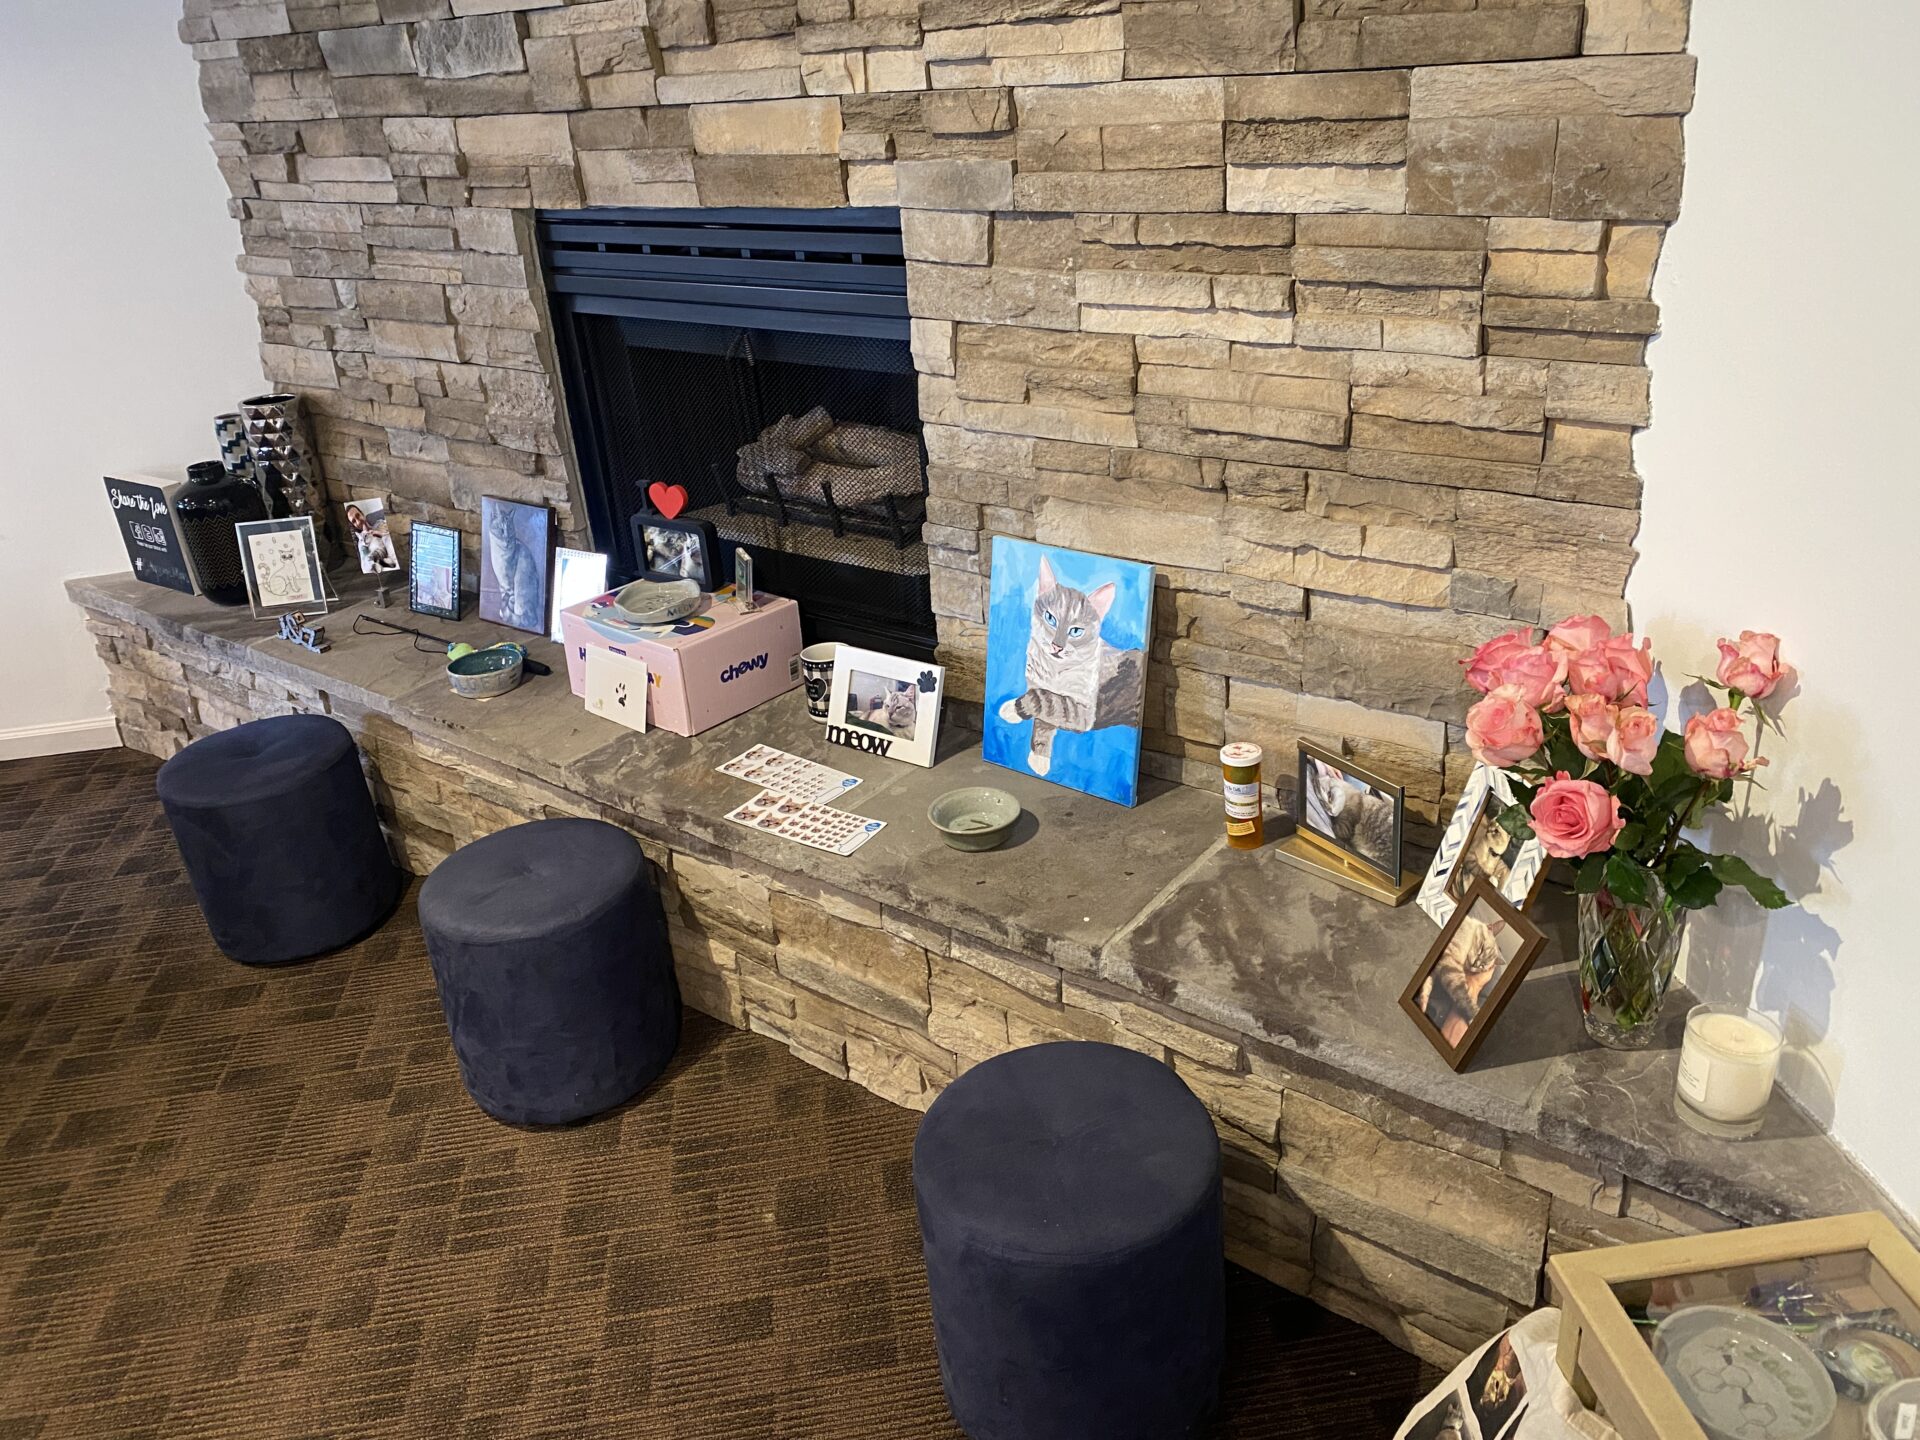 A picture of a fireplace set up for a Zoloft's memorial service There are roses, pictures, a box from Chewy, bowls, his favorite toy, and more in view. I miss him a lot.